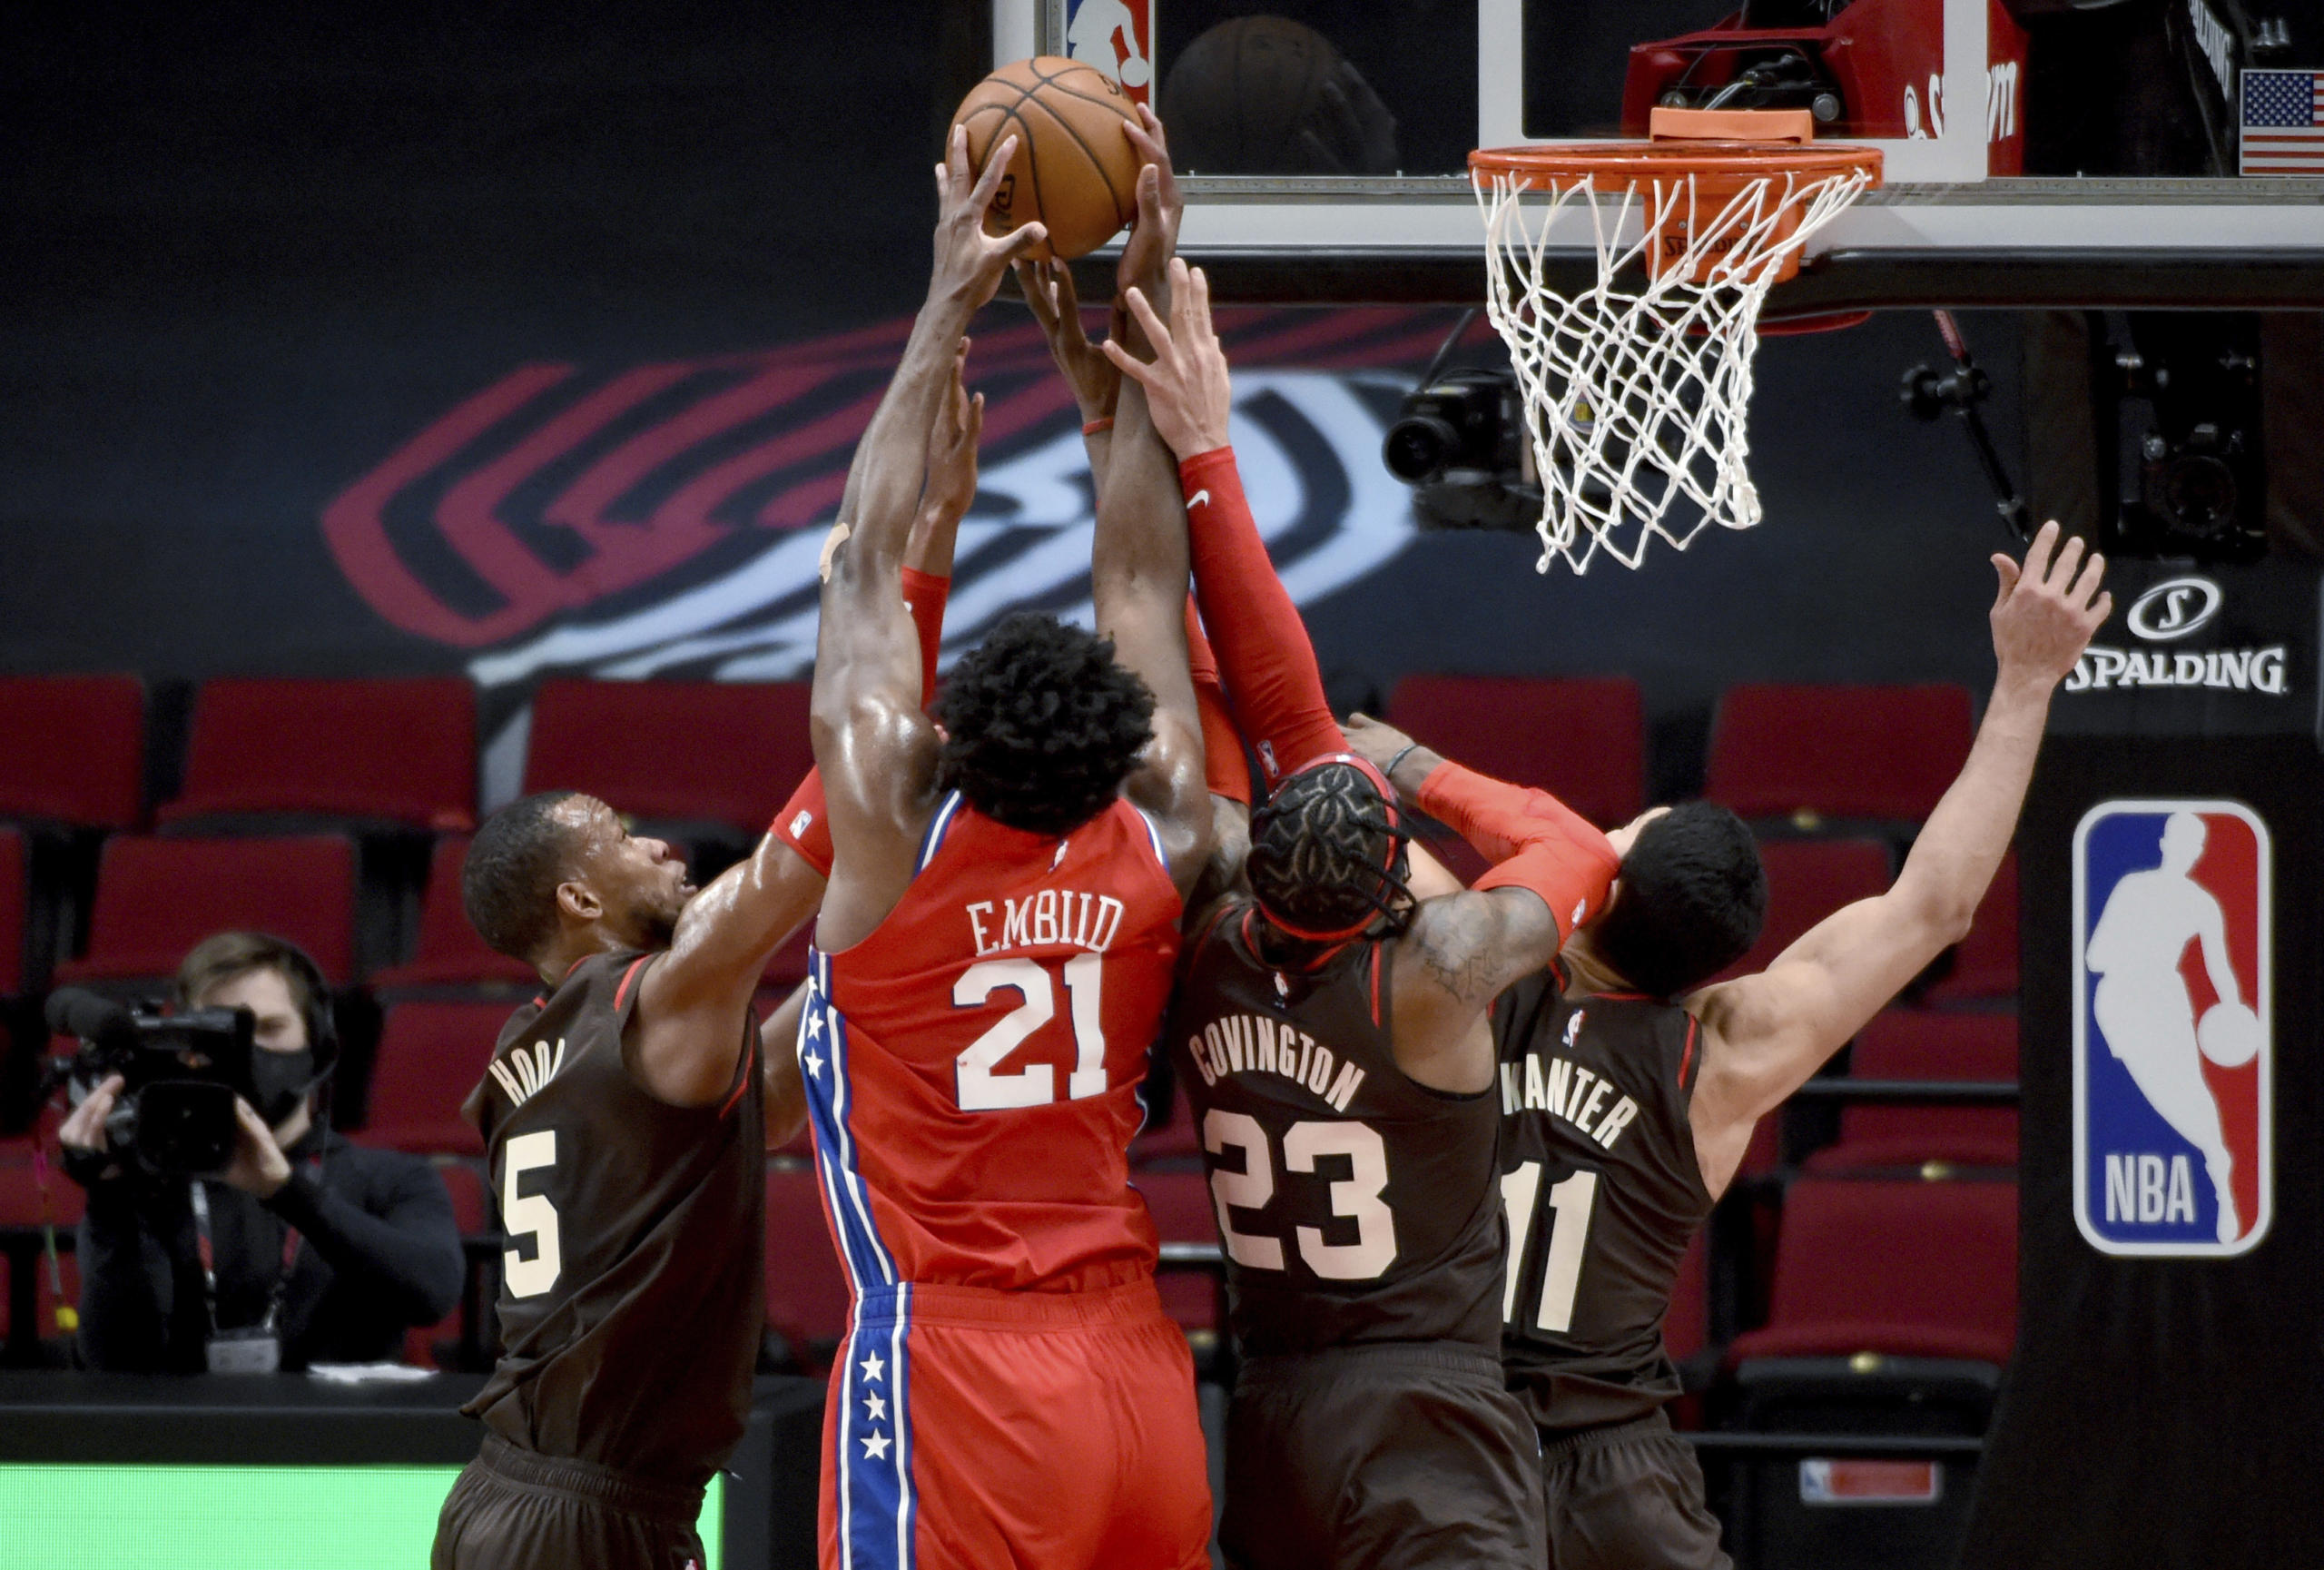 Philadelphia 76ers center Joel Embiid (21) goes after a rebound with Portland Trail Blazers guard Rodney Hood, left, forward Robert Covington, center, and center Enes Kanter, right, during the first half of an NBA basketball game in Portland, Ore., Thursday, Feb. 11, 2021.